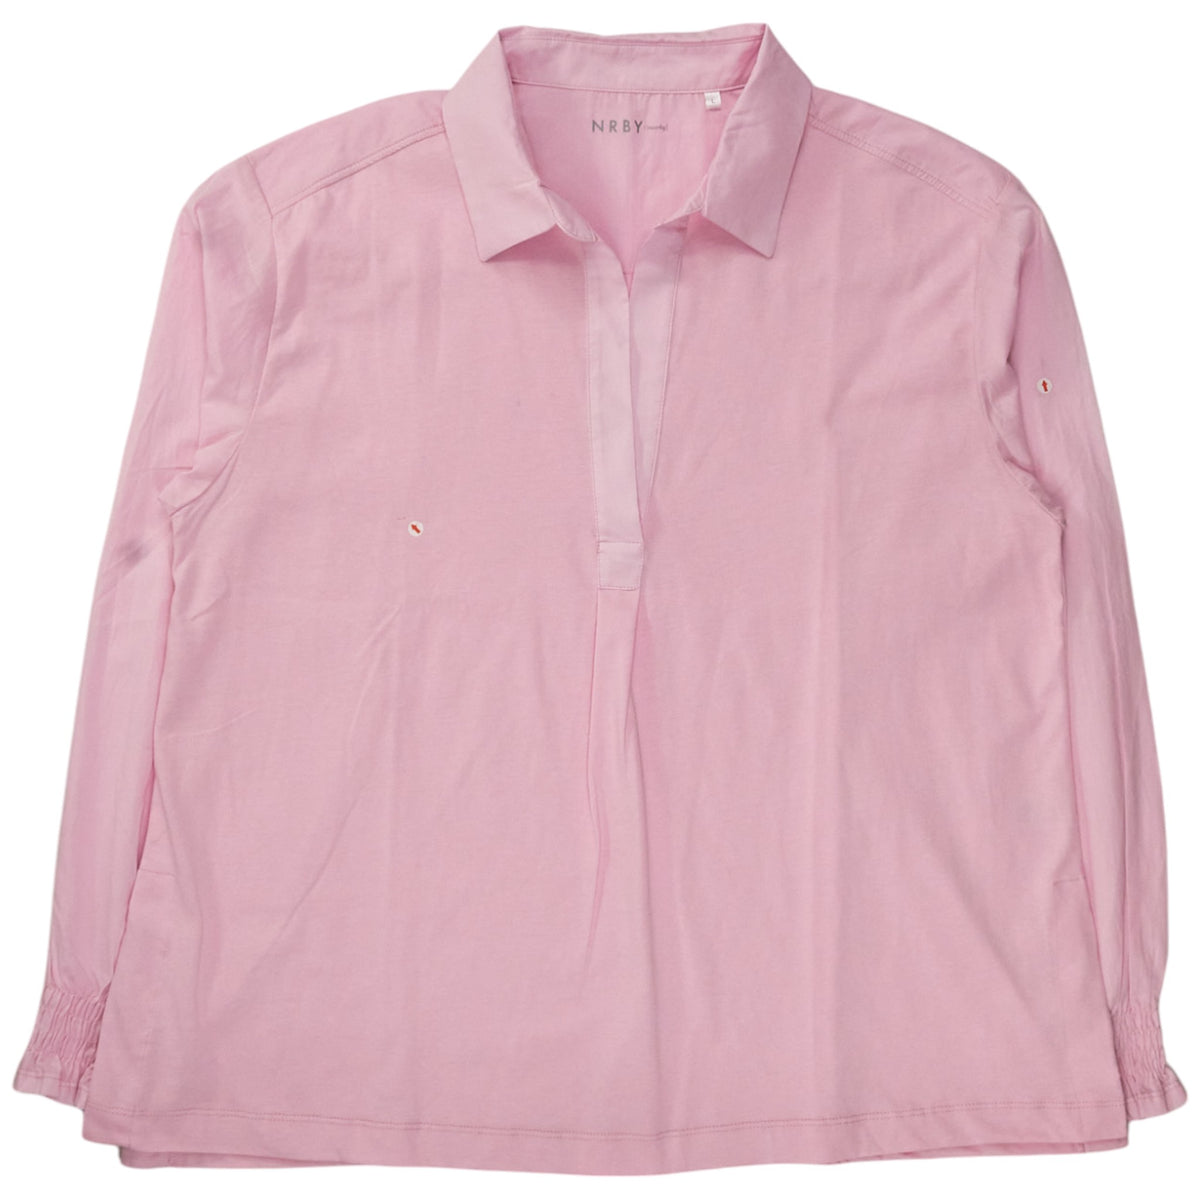 NRBY Pink Jersey/Cotton Shirt